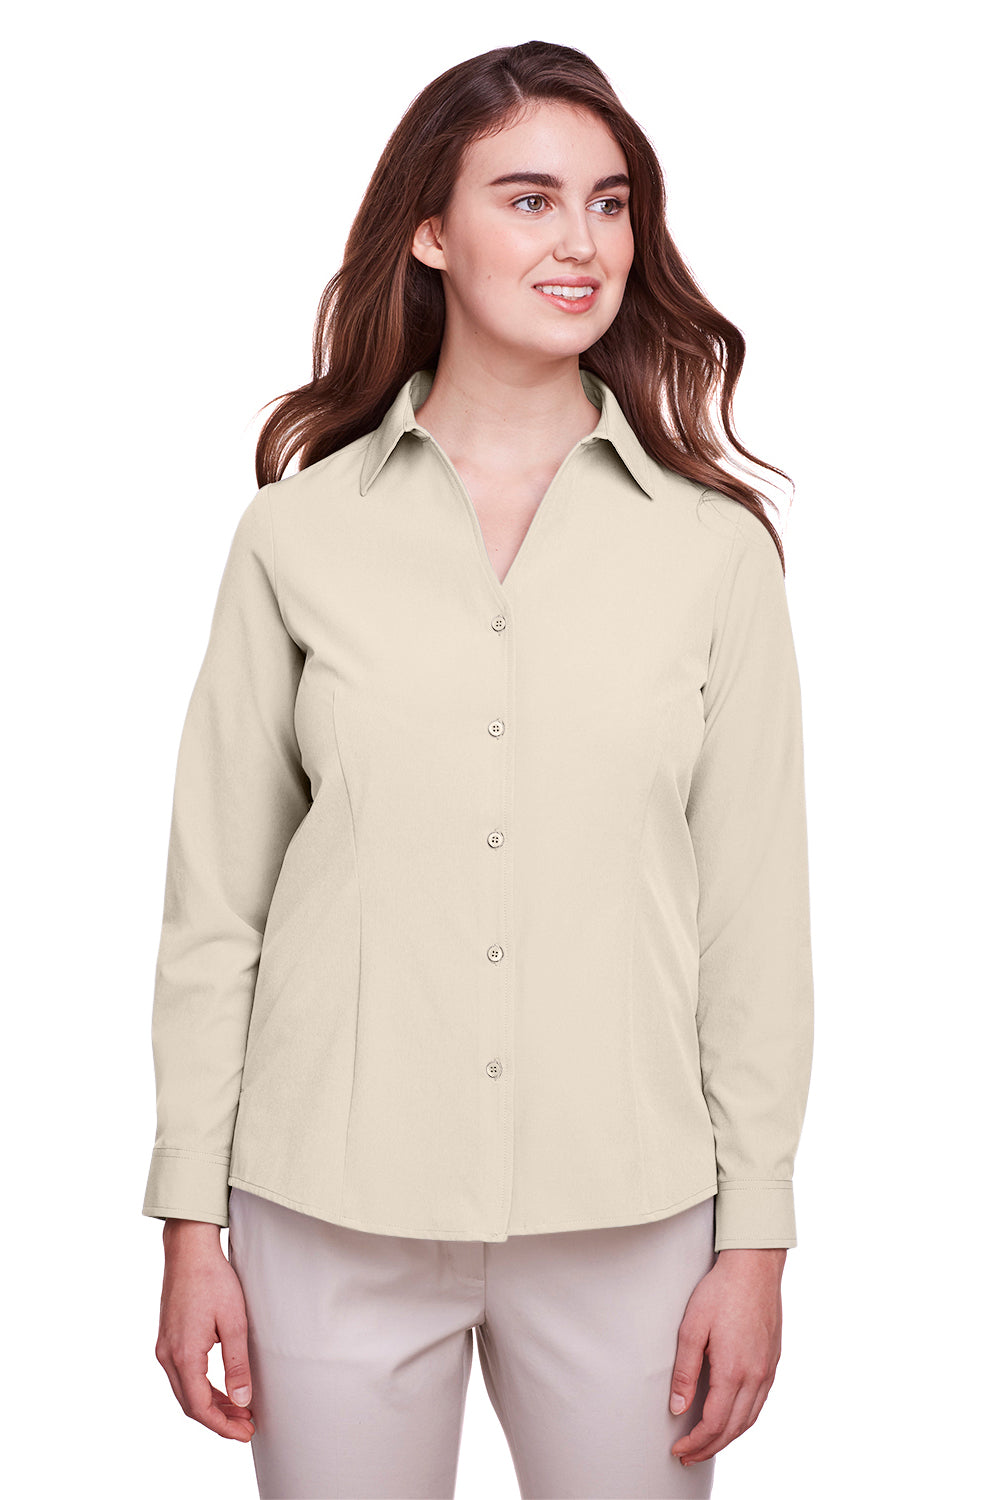 UltraClub UC500W Womens Bradley Performance Moisture Wicking Long Sleeve Button Down Shirt Stone Brown Front